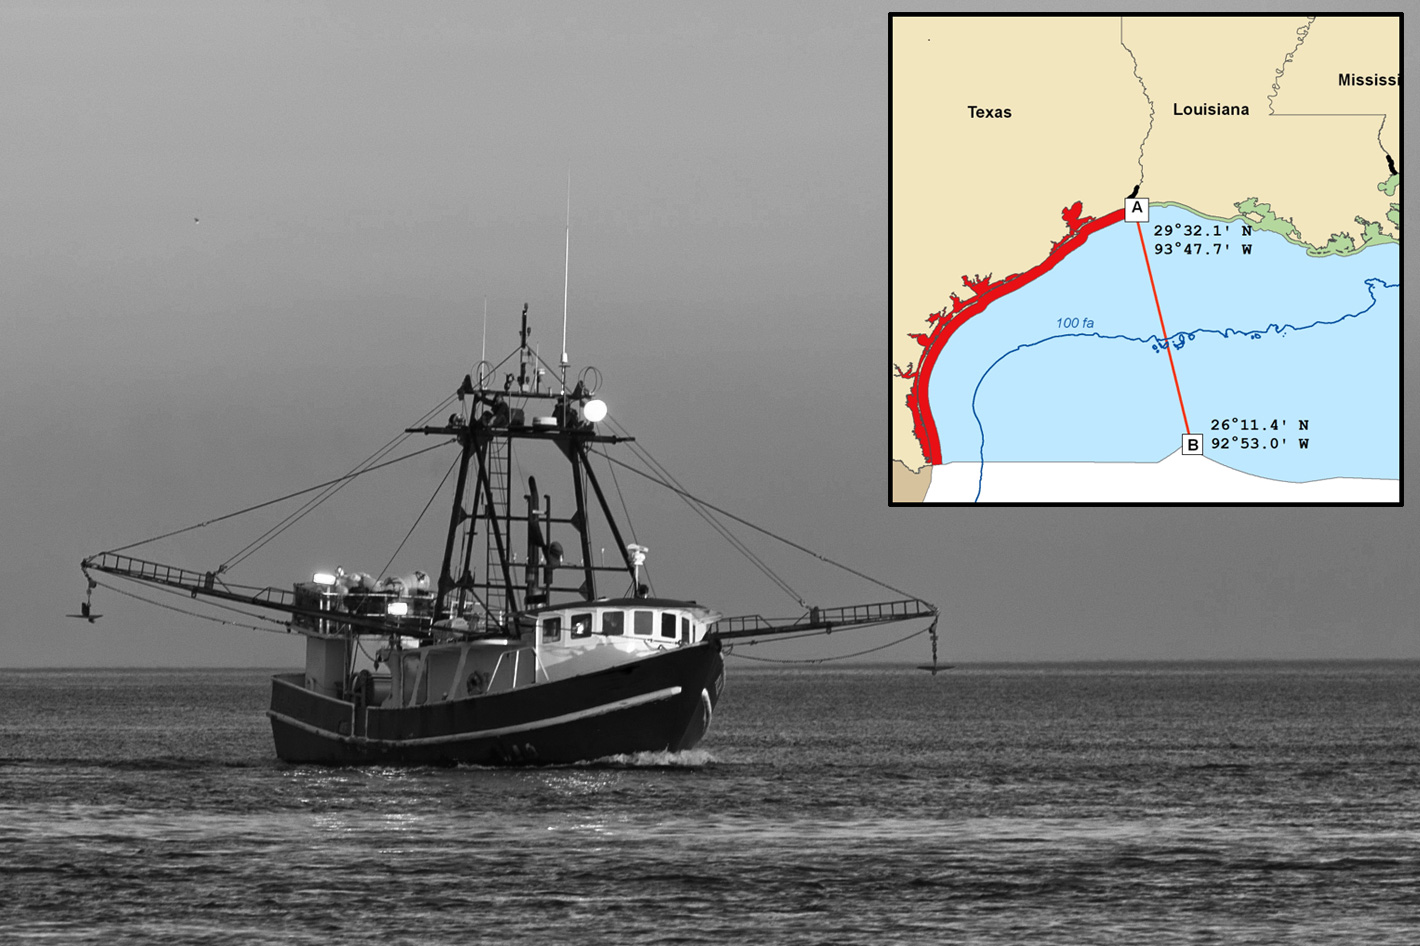 Texas opens its waters to shrimp trawling on July 15